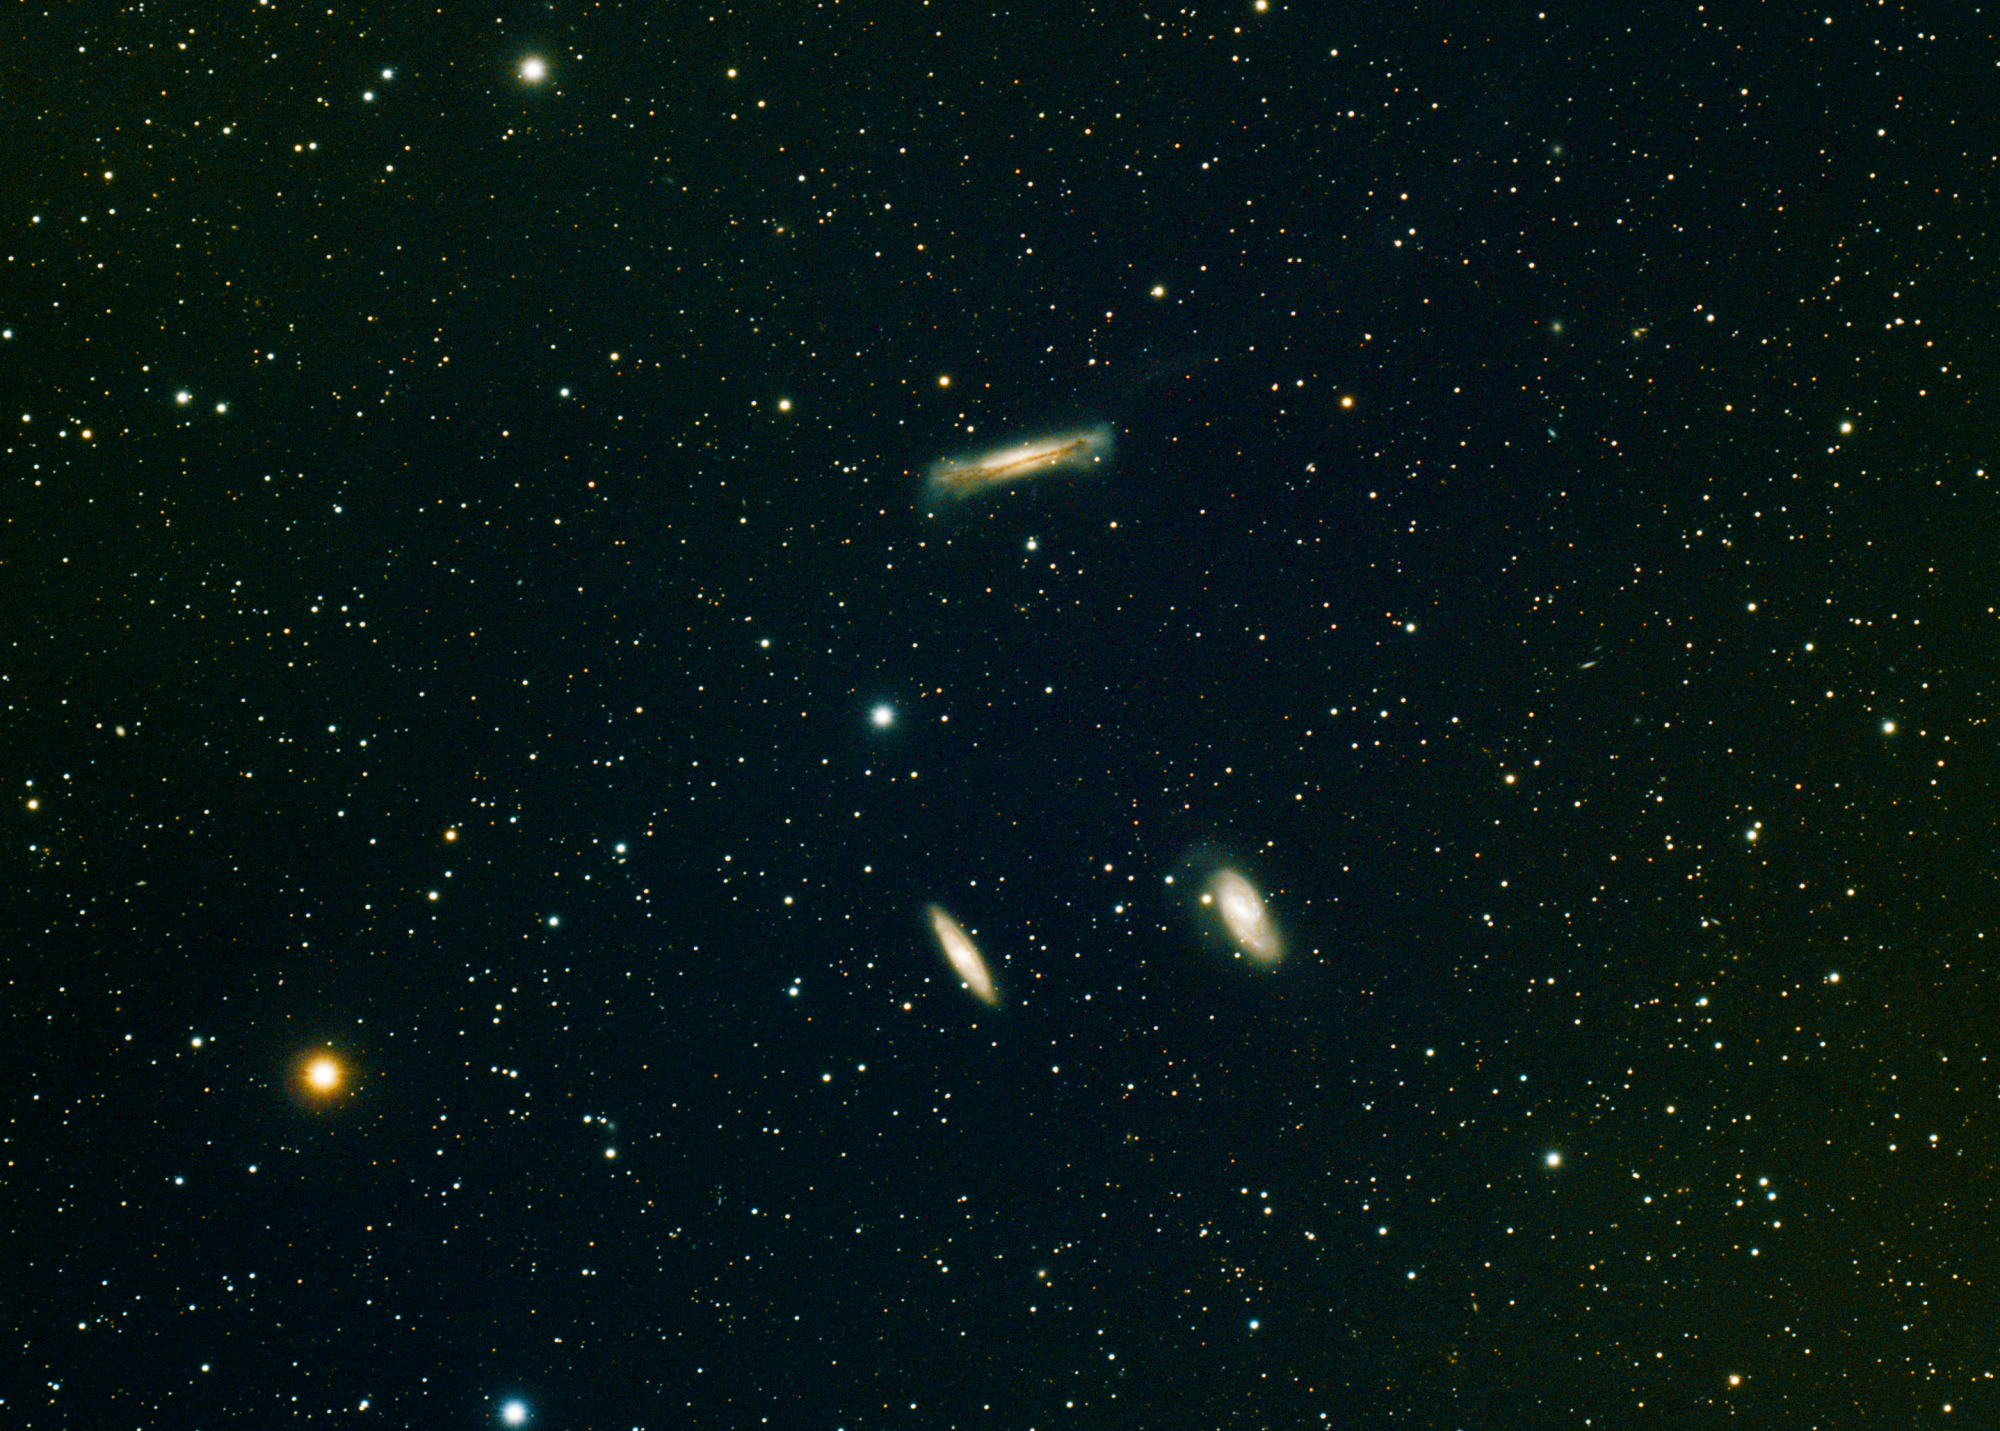 NGC_3628_35X5_MINUTE_MONT_DE_LURE_SIRIPS.png